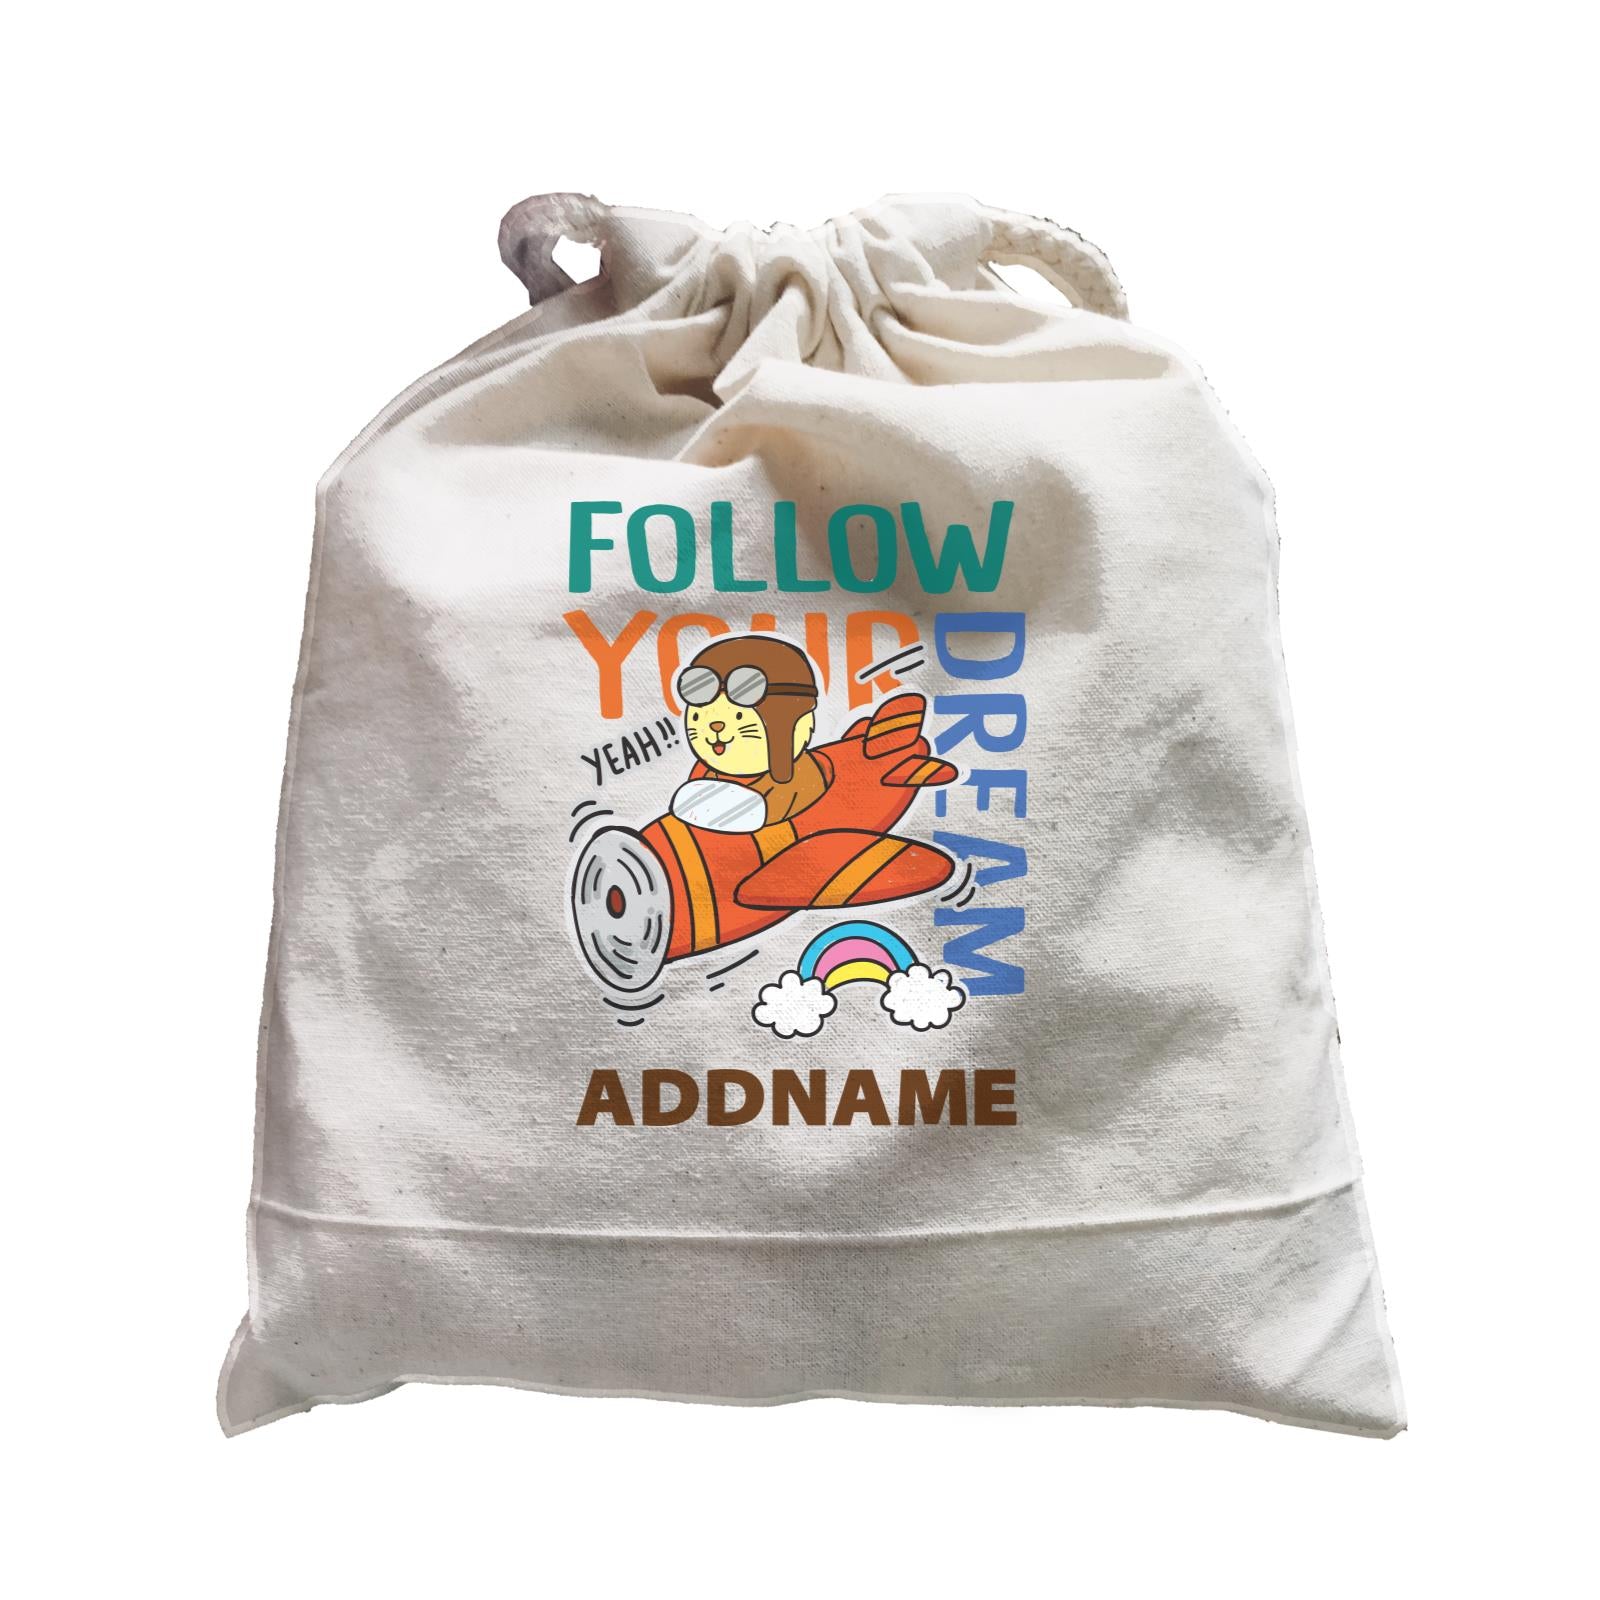 Cool Cute Animals Cats Follow Your Dream Addname Satchel